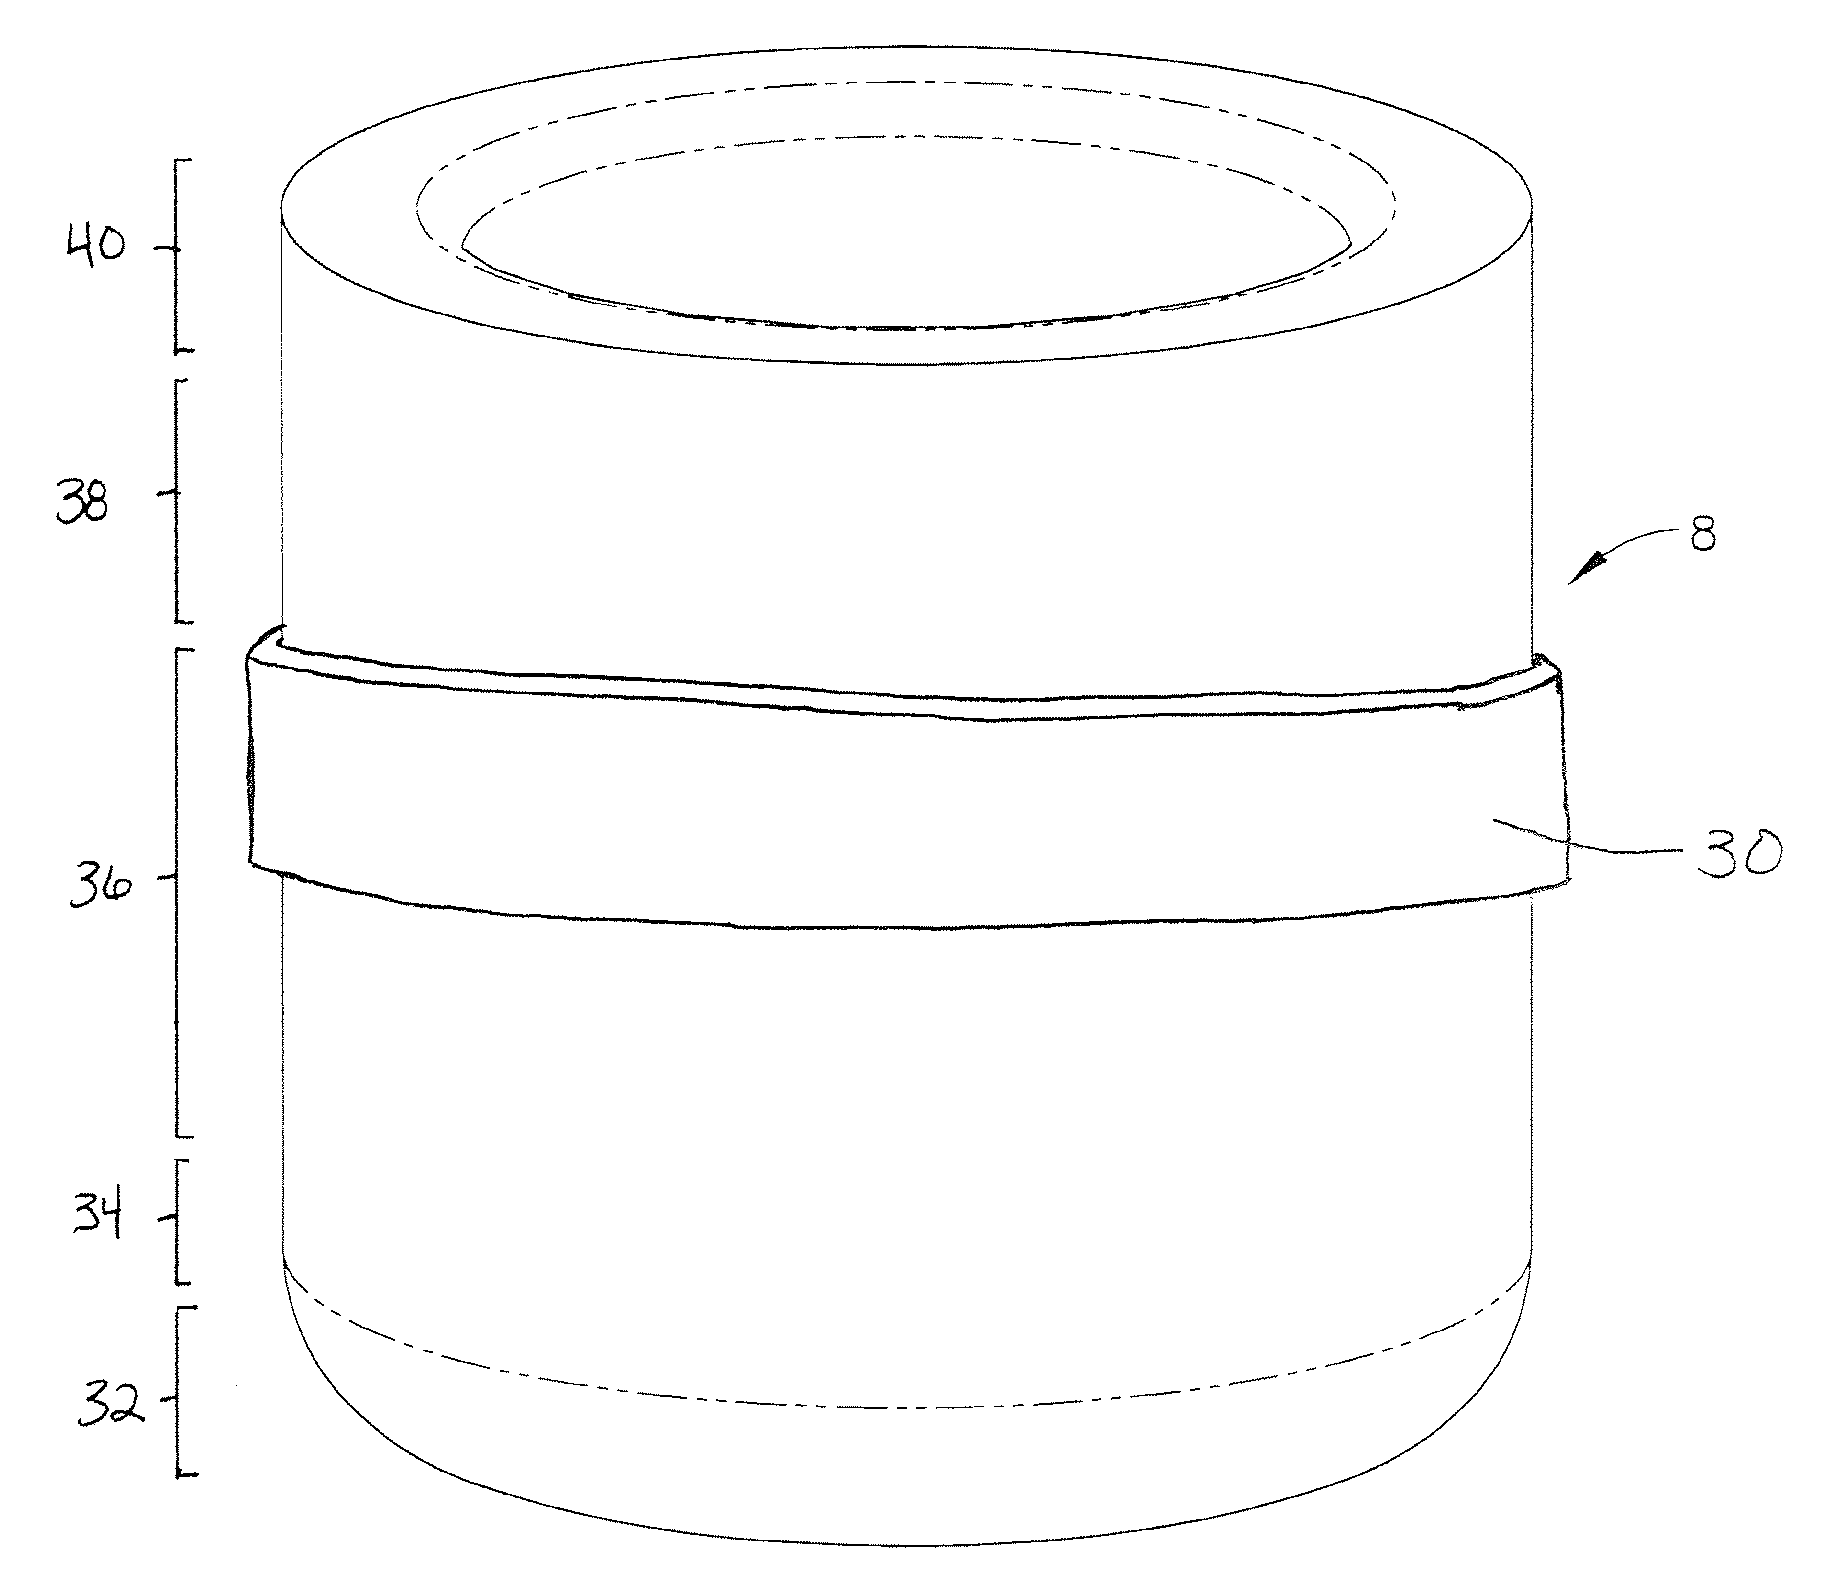 Refractory crucibles capable of managing thermal stress and suitable for melting highly reactive alloys